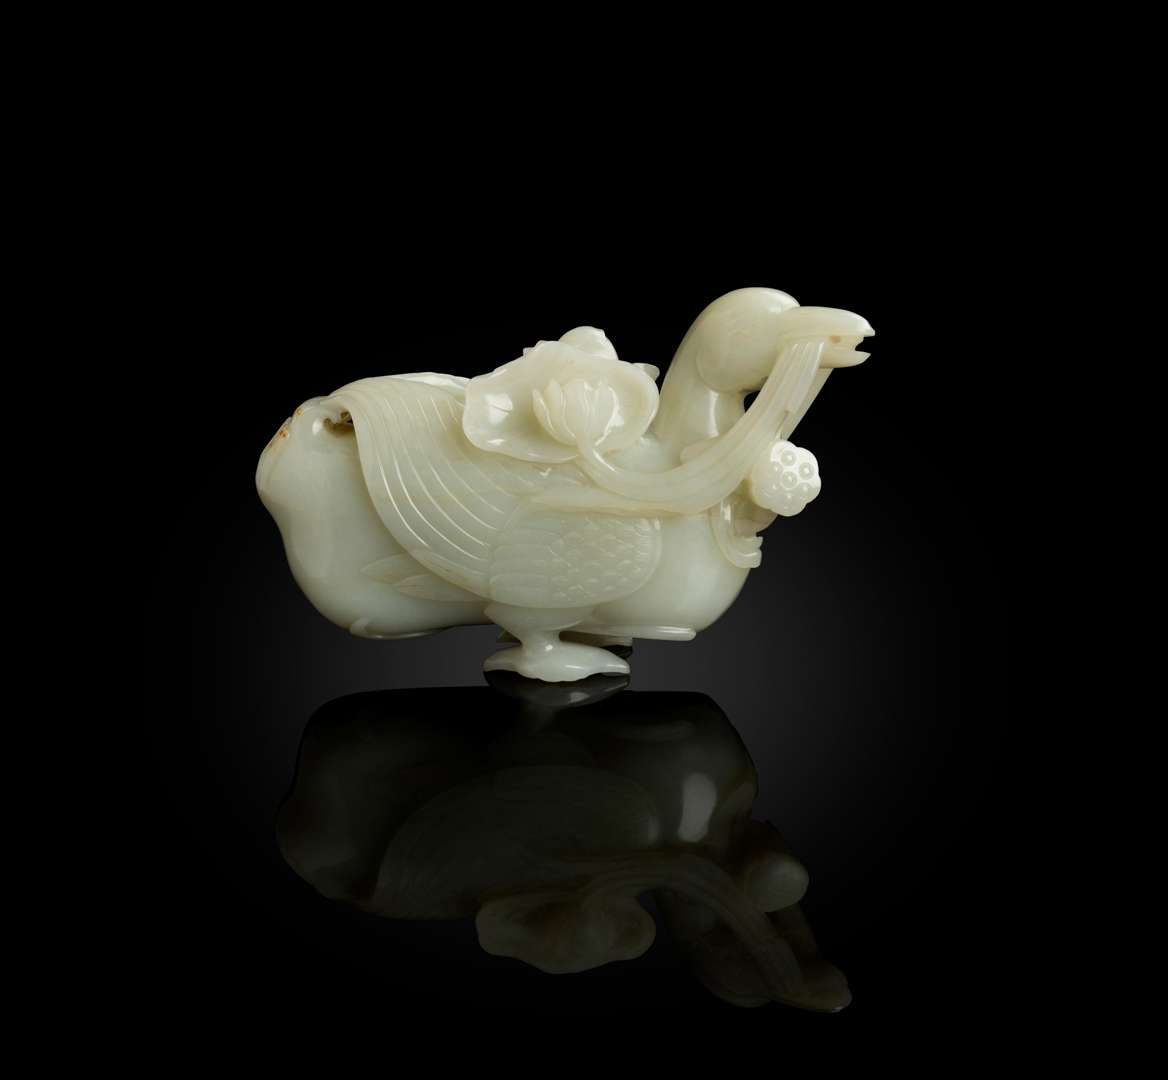 LARGE PALE CELADON JADE CARVING OF A DUCK